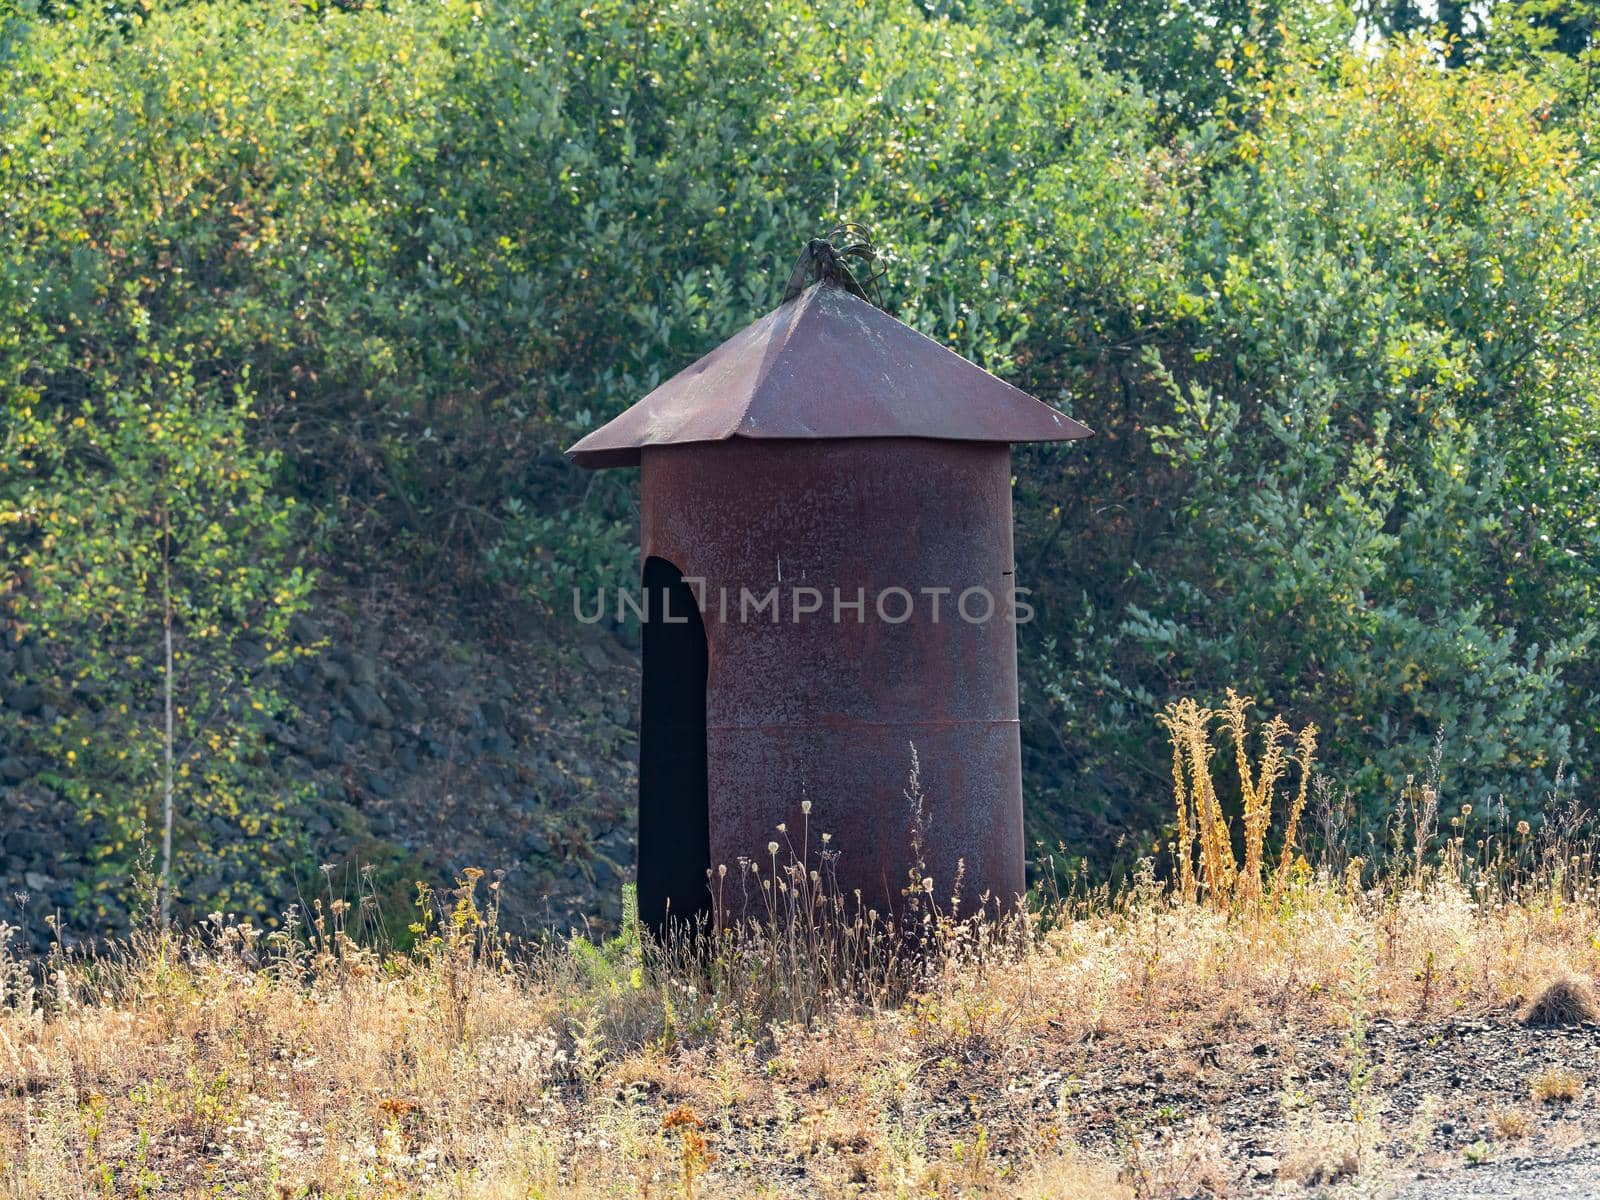 Rusty shelter protecting demolition man during dynamite explosion  by rdonar2